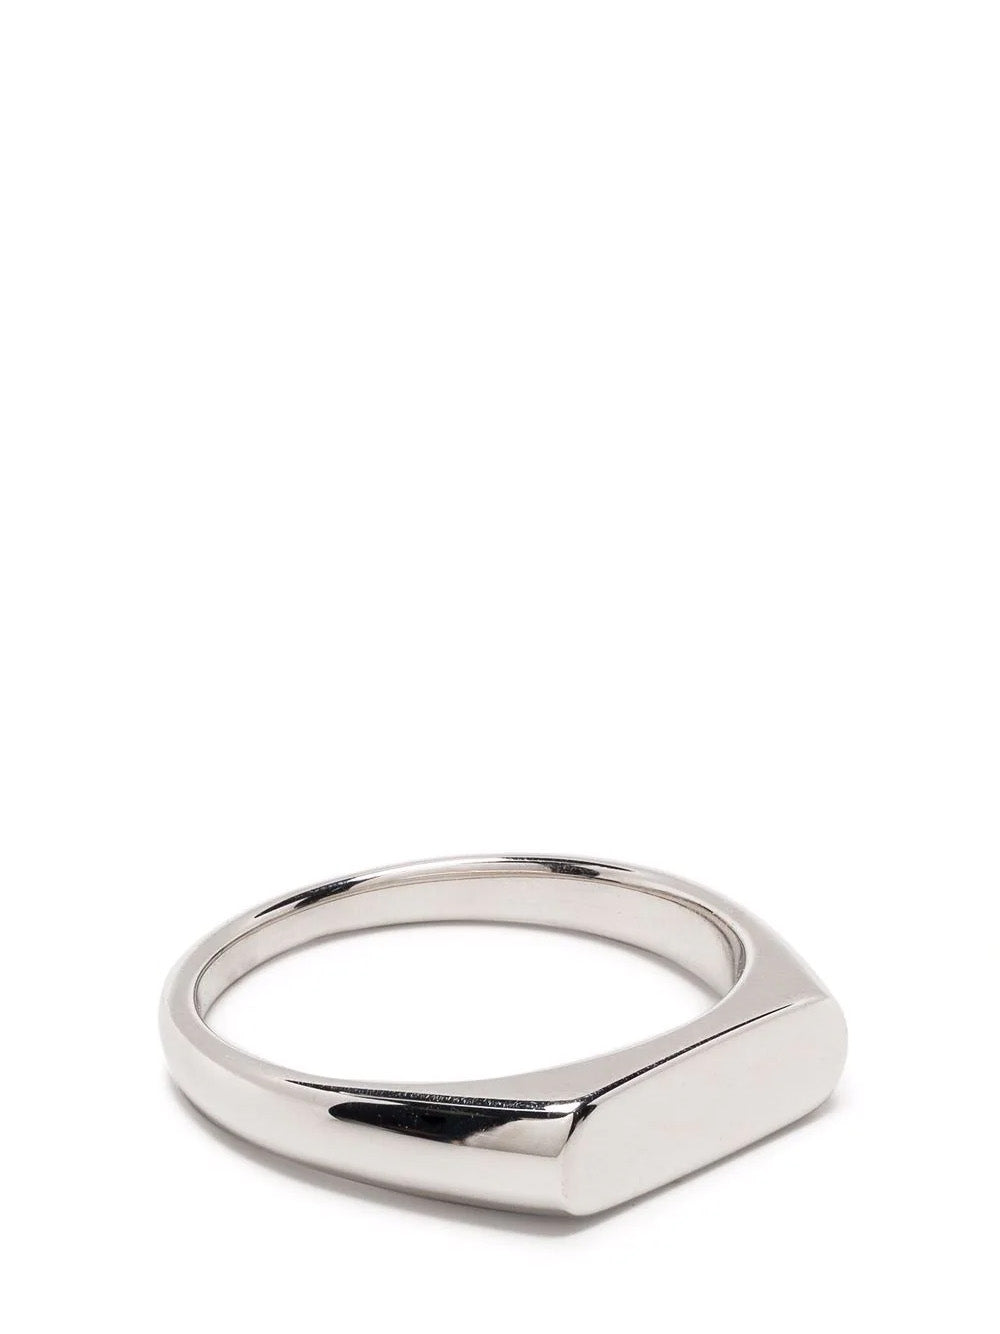     Tom-Wood-Knut-Ring-925-Sterling-Silver-Silver-1